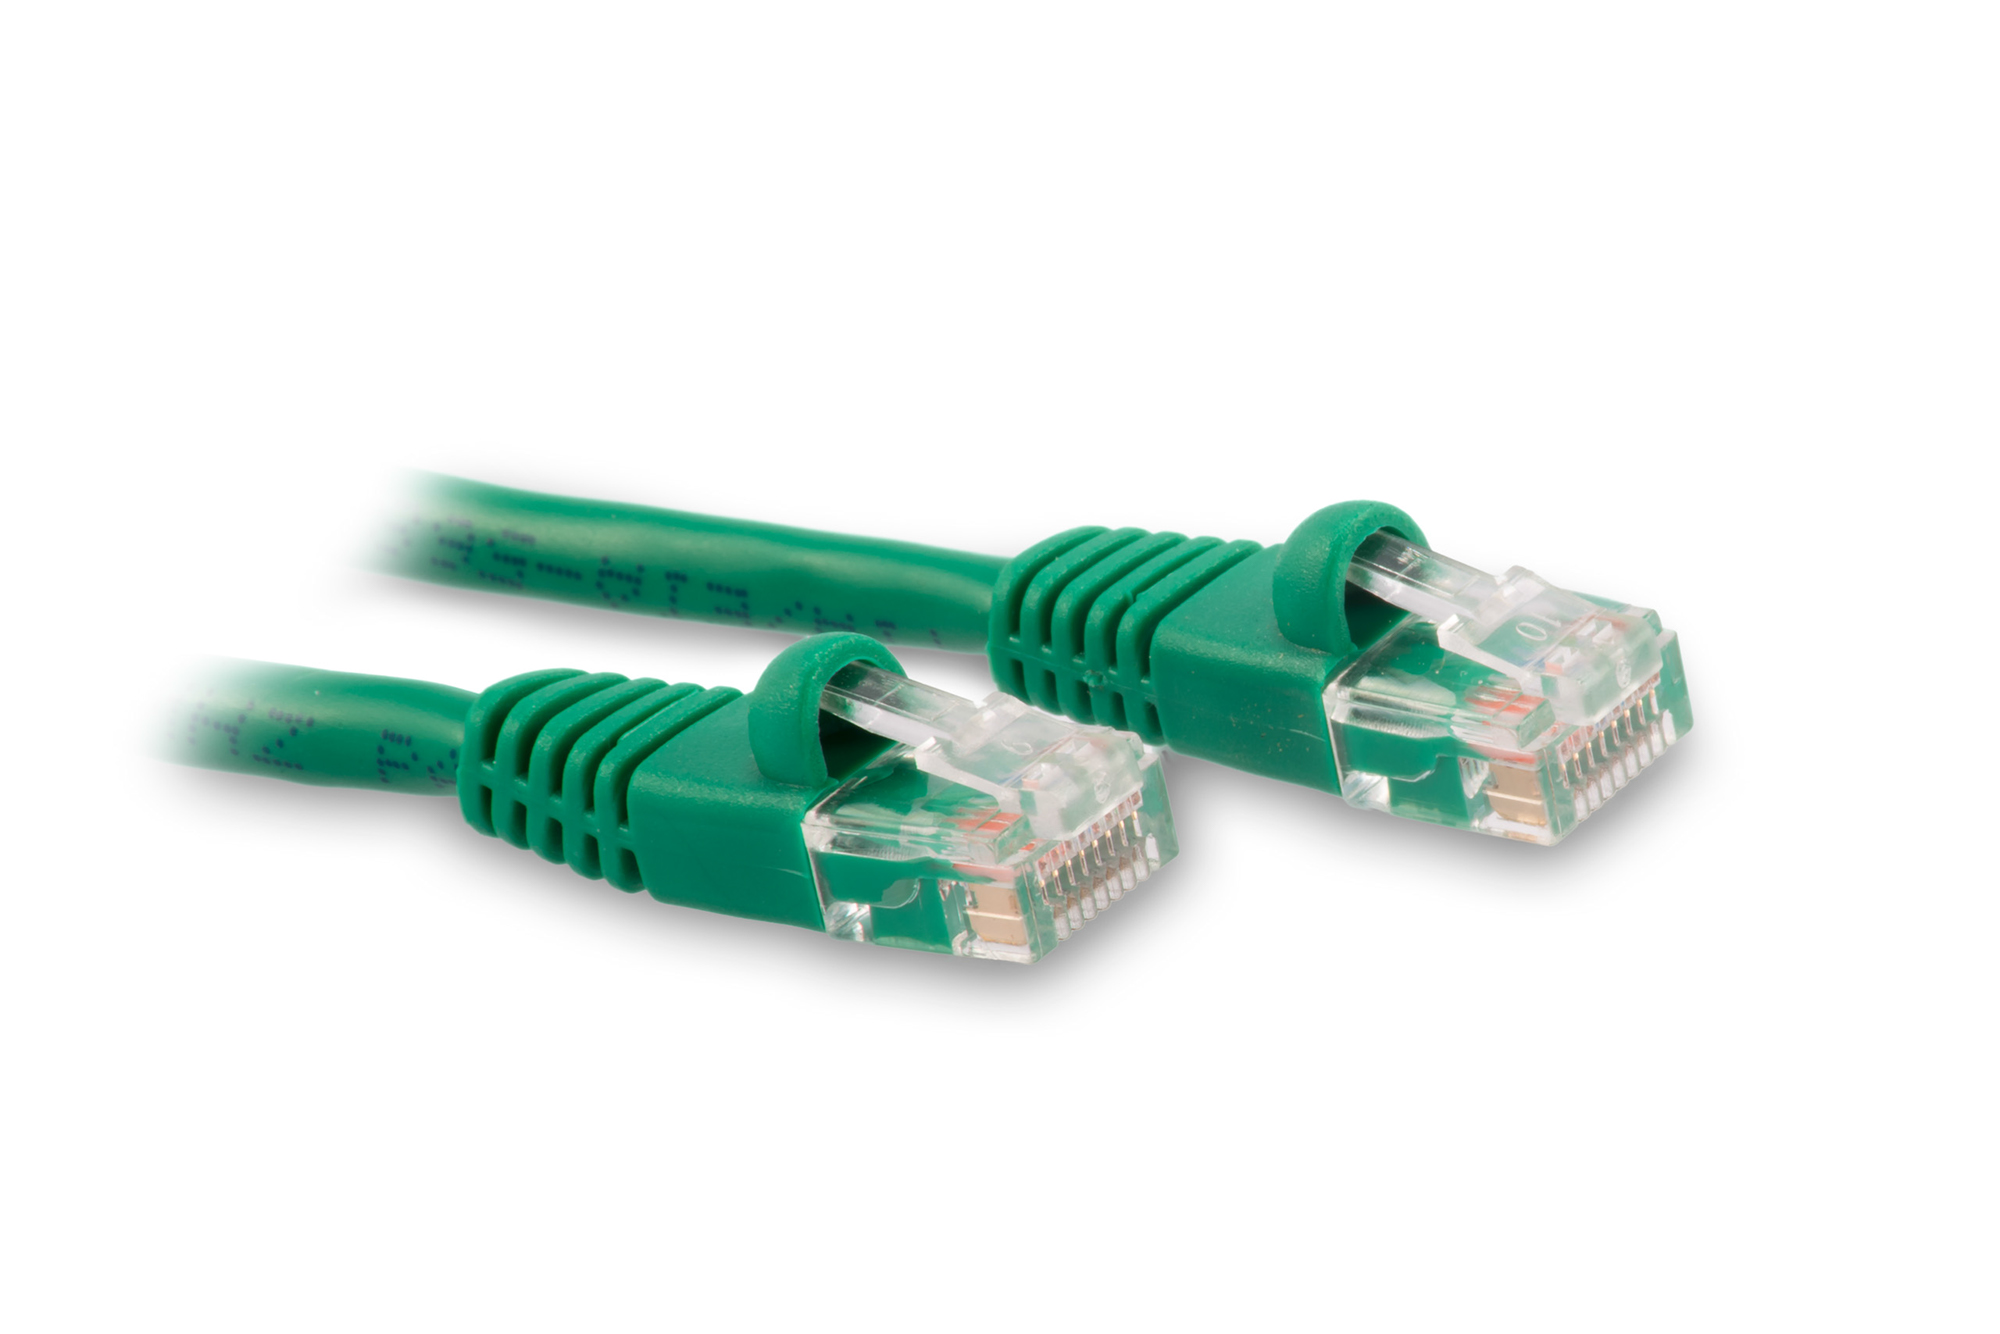 40ft Cat5e Ethernet Patch Cable - Green Color - Snagless Boot